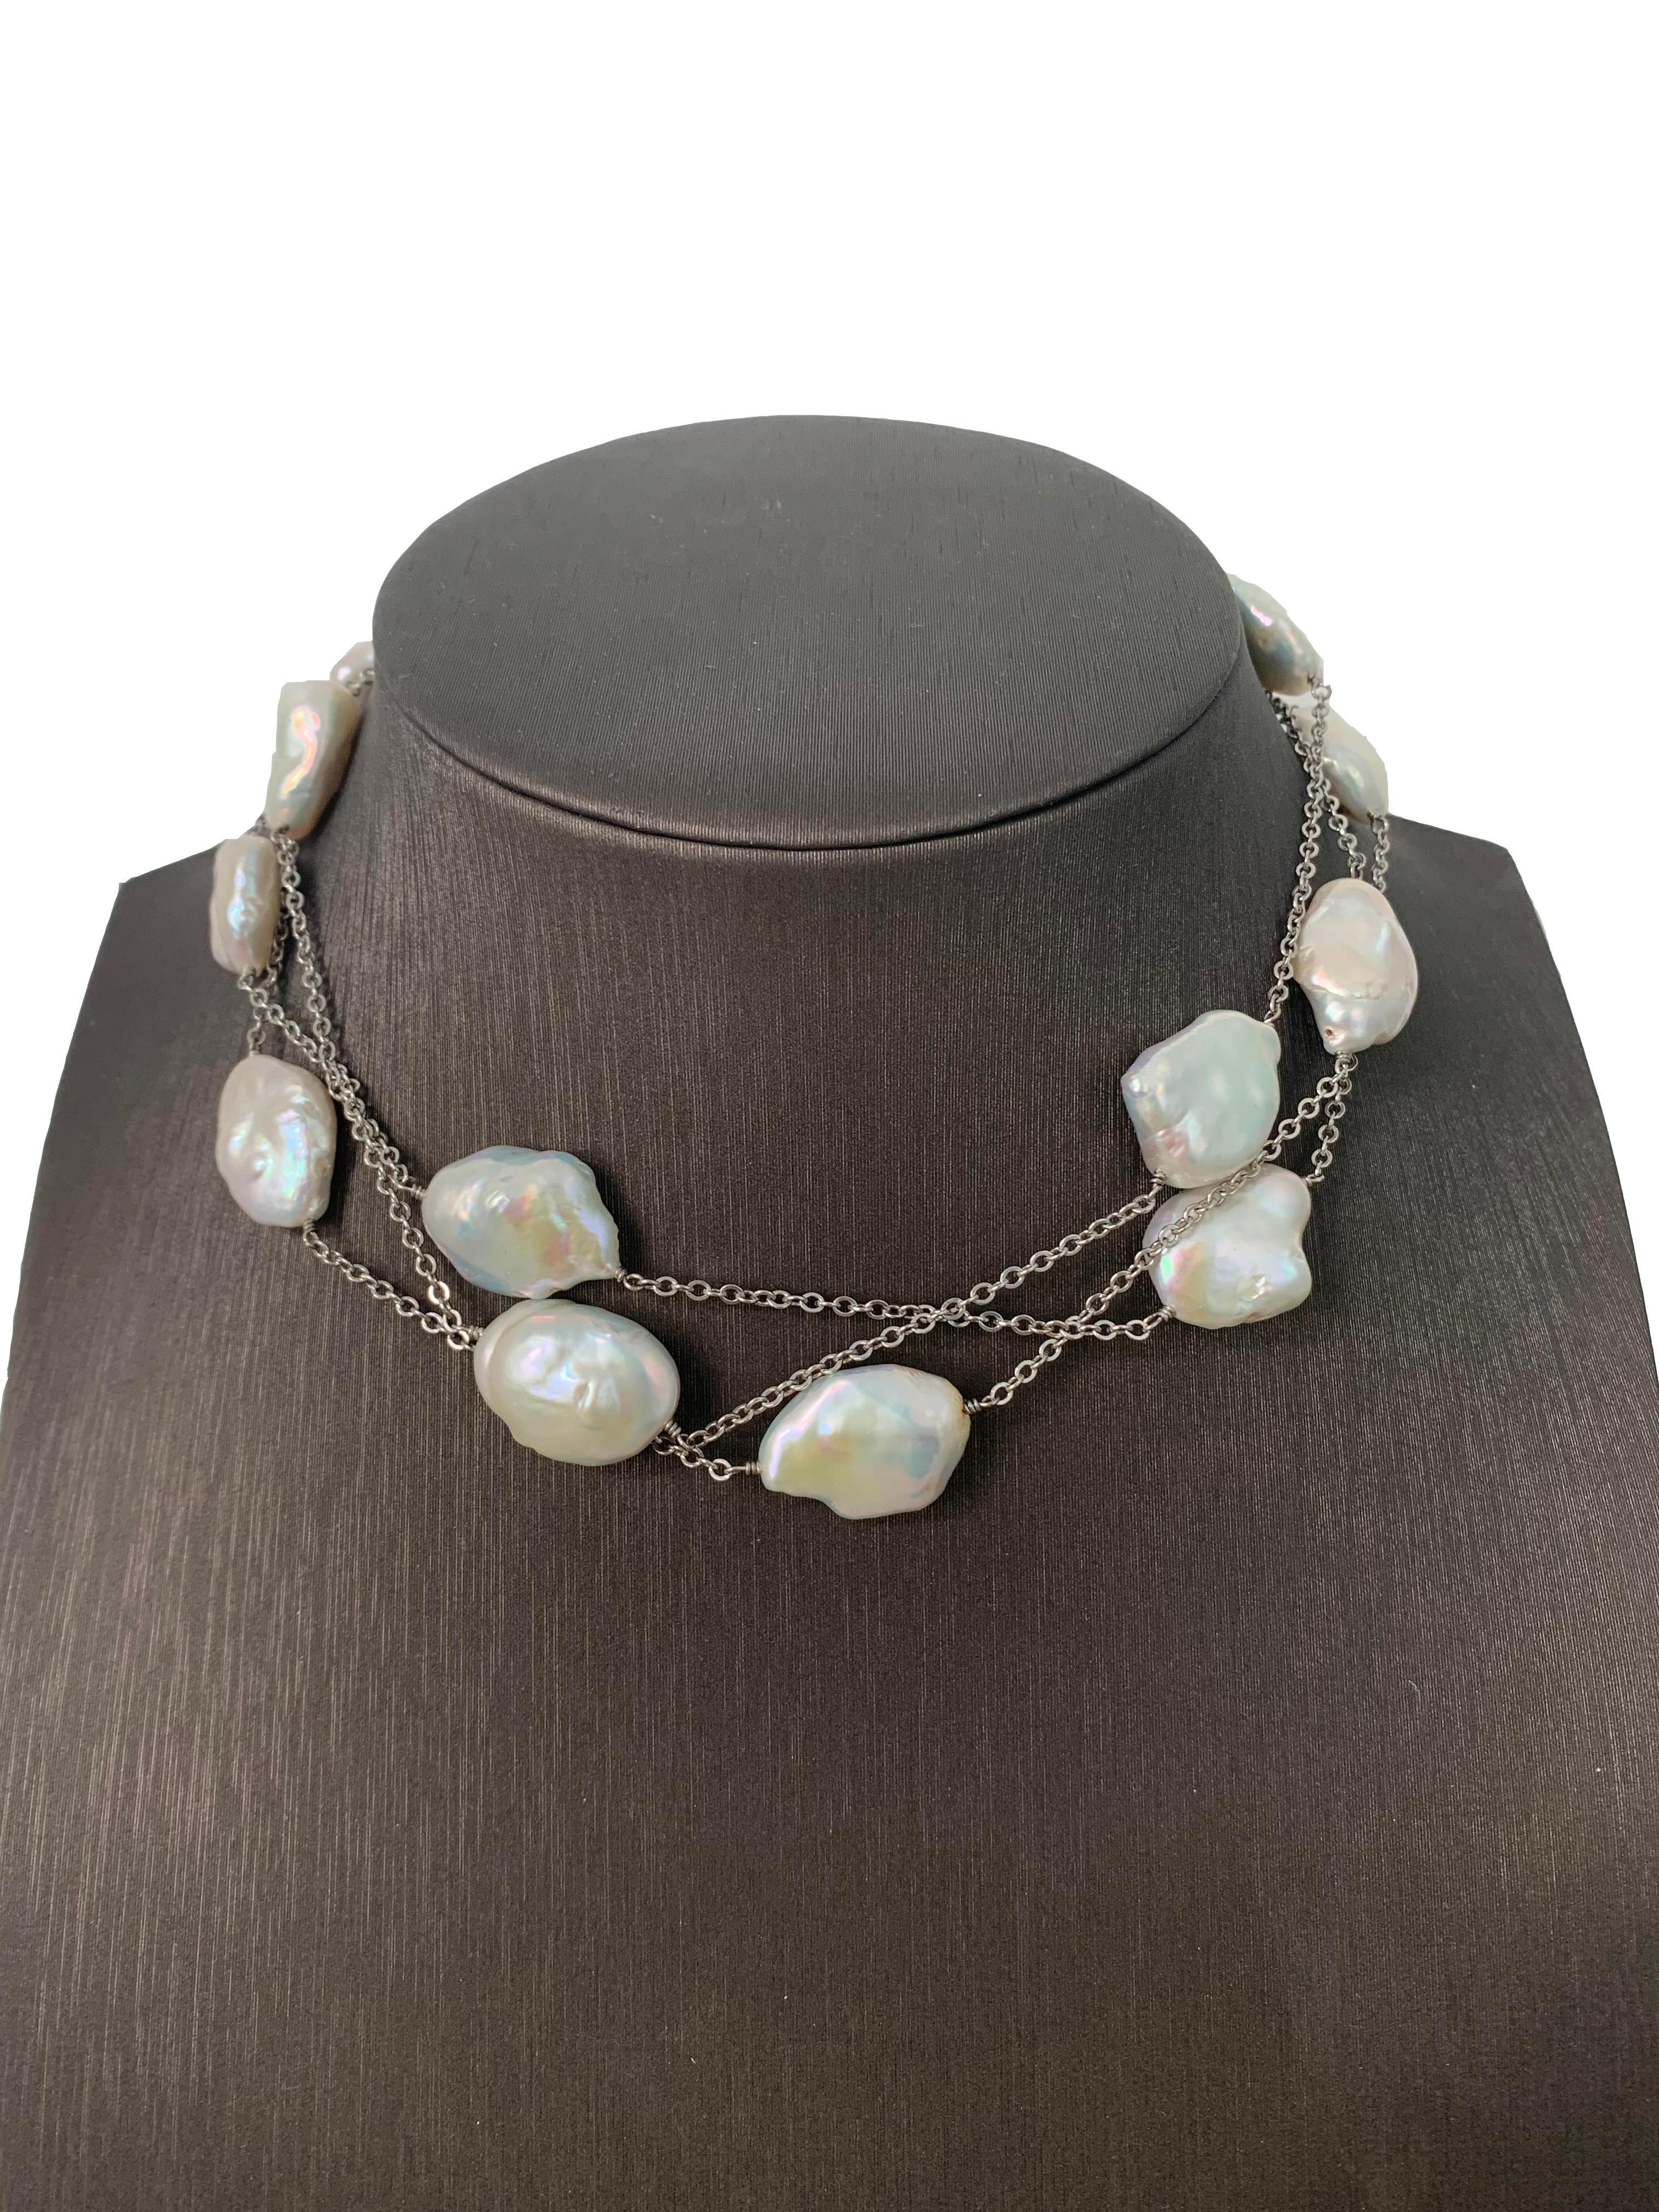 Modern Large lustrous Keishi Pearl Station Necklace 50